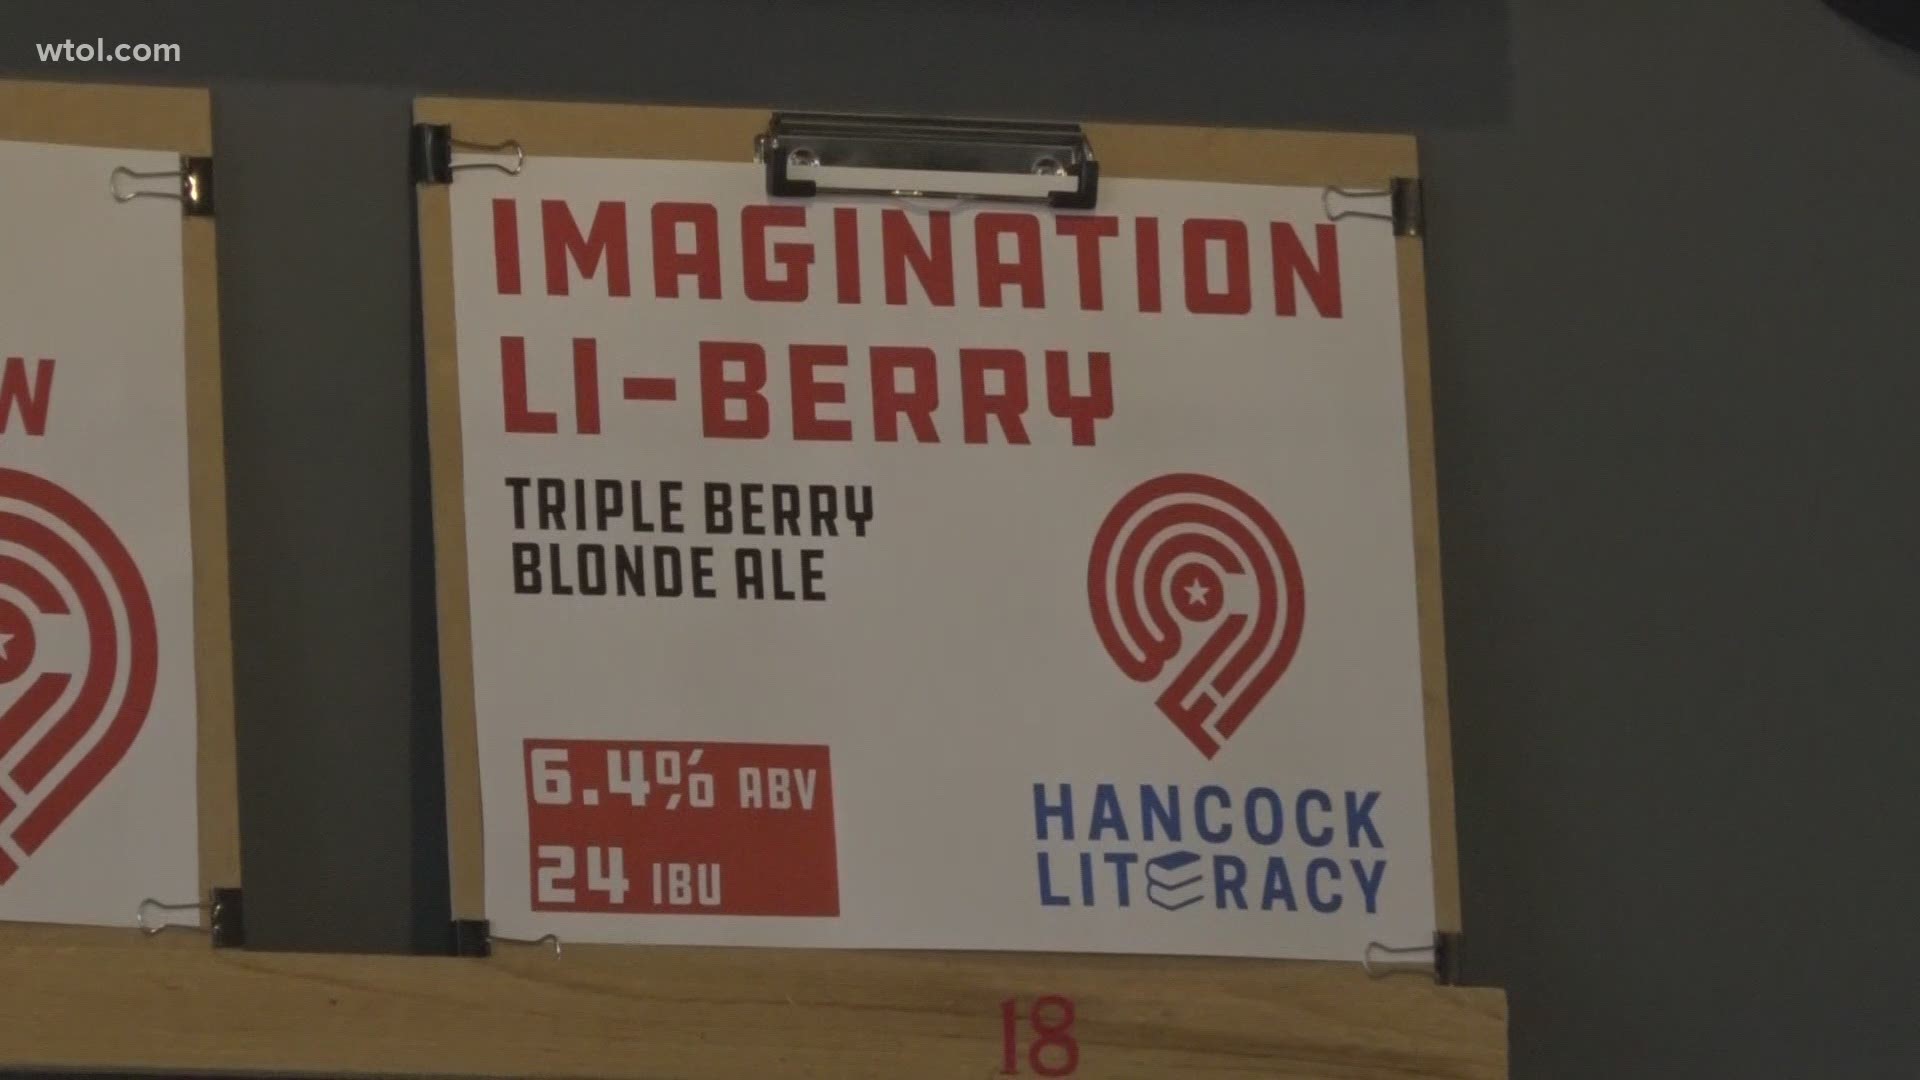 The new beer, Imagination Li-Berry, is a Triple Berry Blonde Ale. Proceeds will support youth and adult literacy programs in Hancock County.